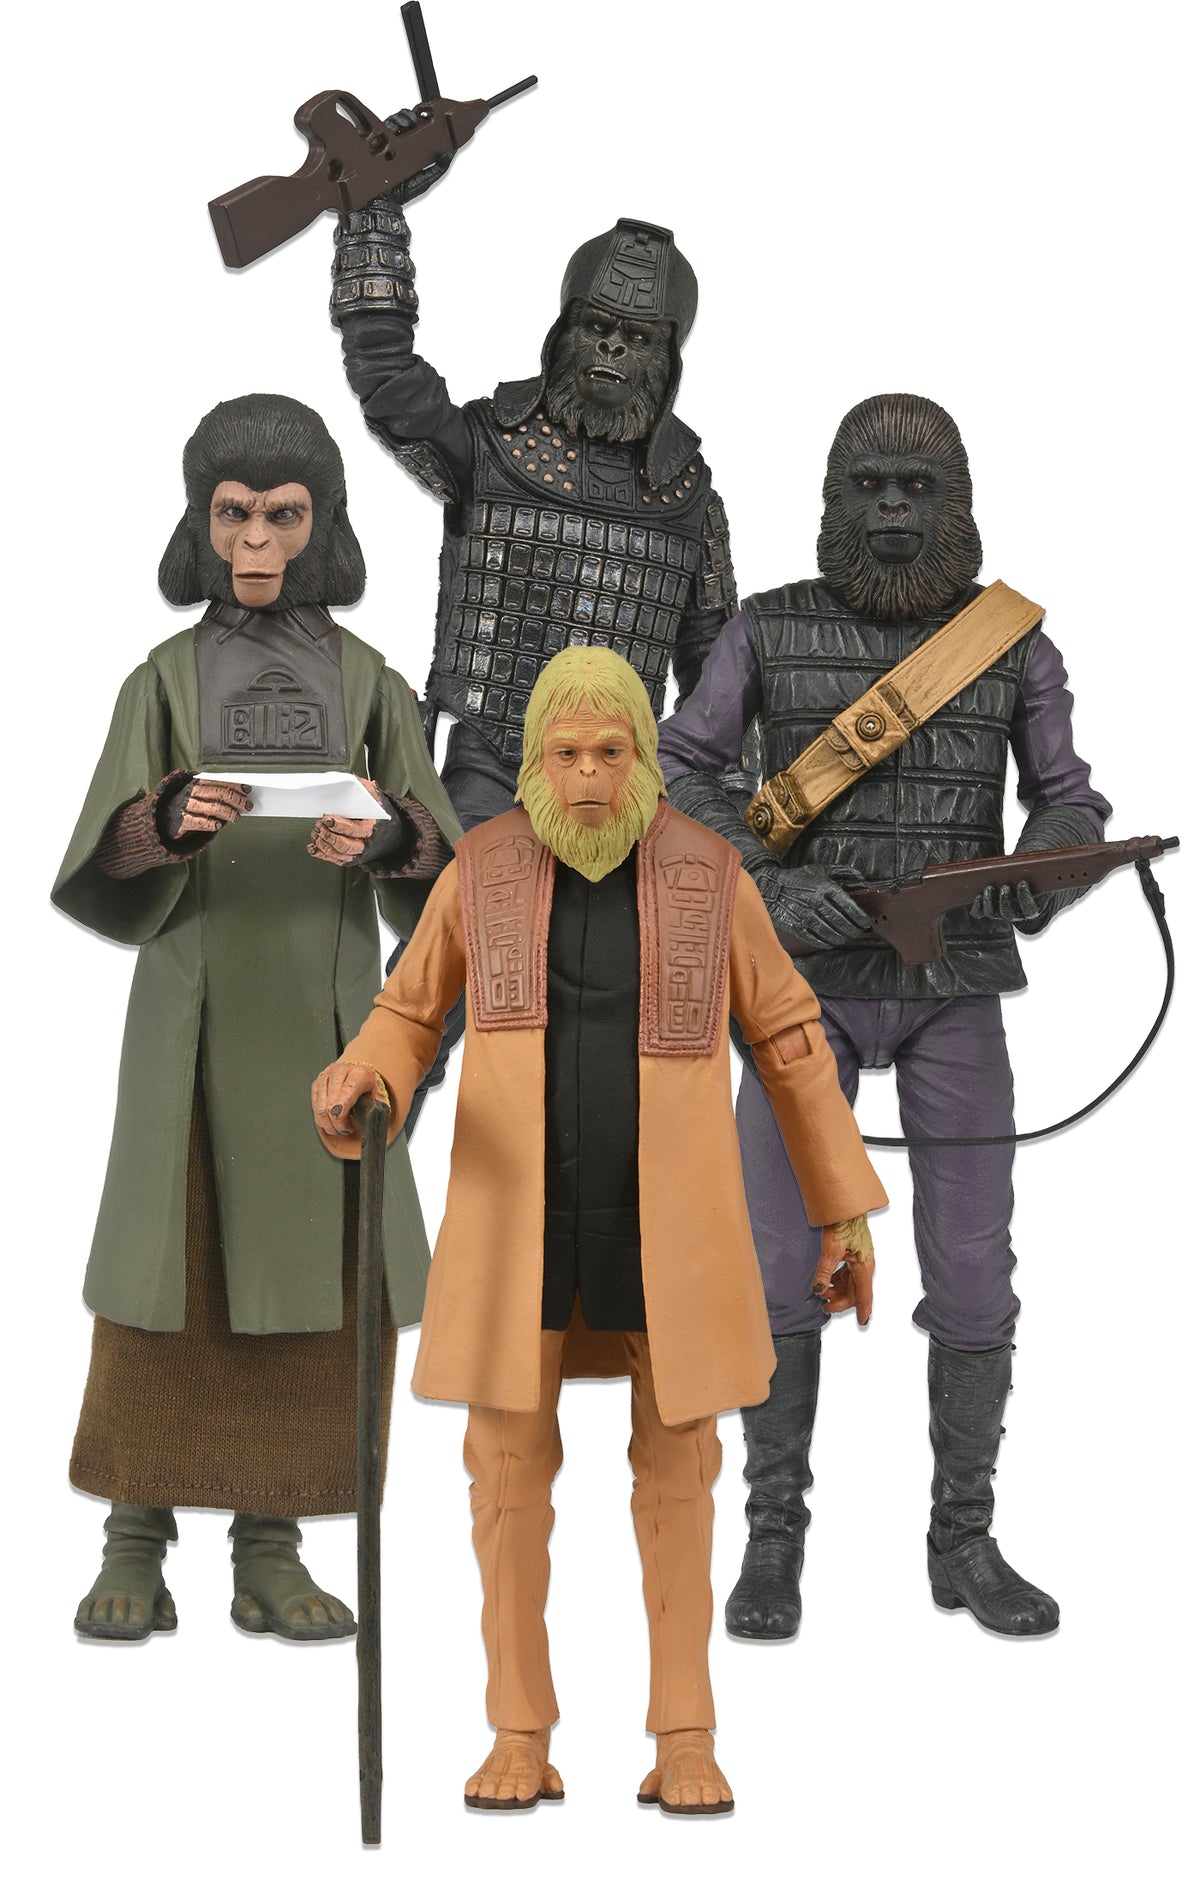 NECA - Planet of the Apes: Legacy Series 7" Scale Action Figure Set of 4 (Pre-Order Ships June)